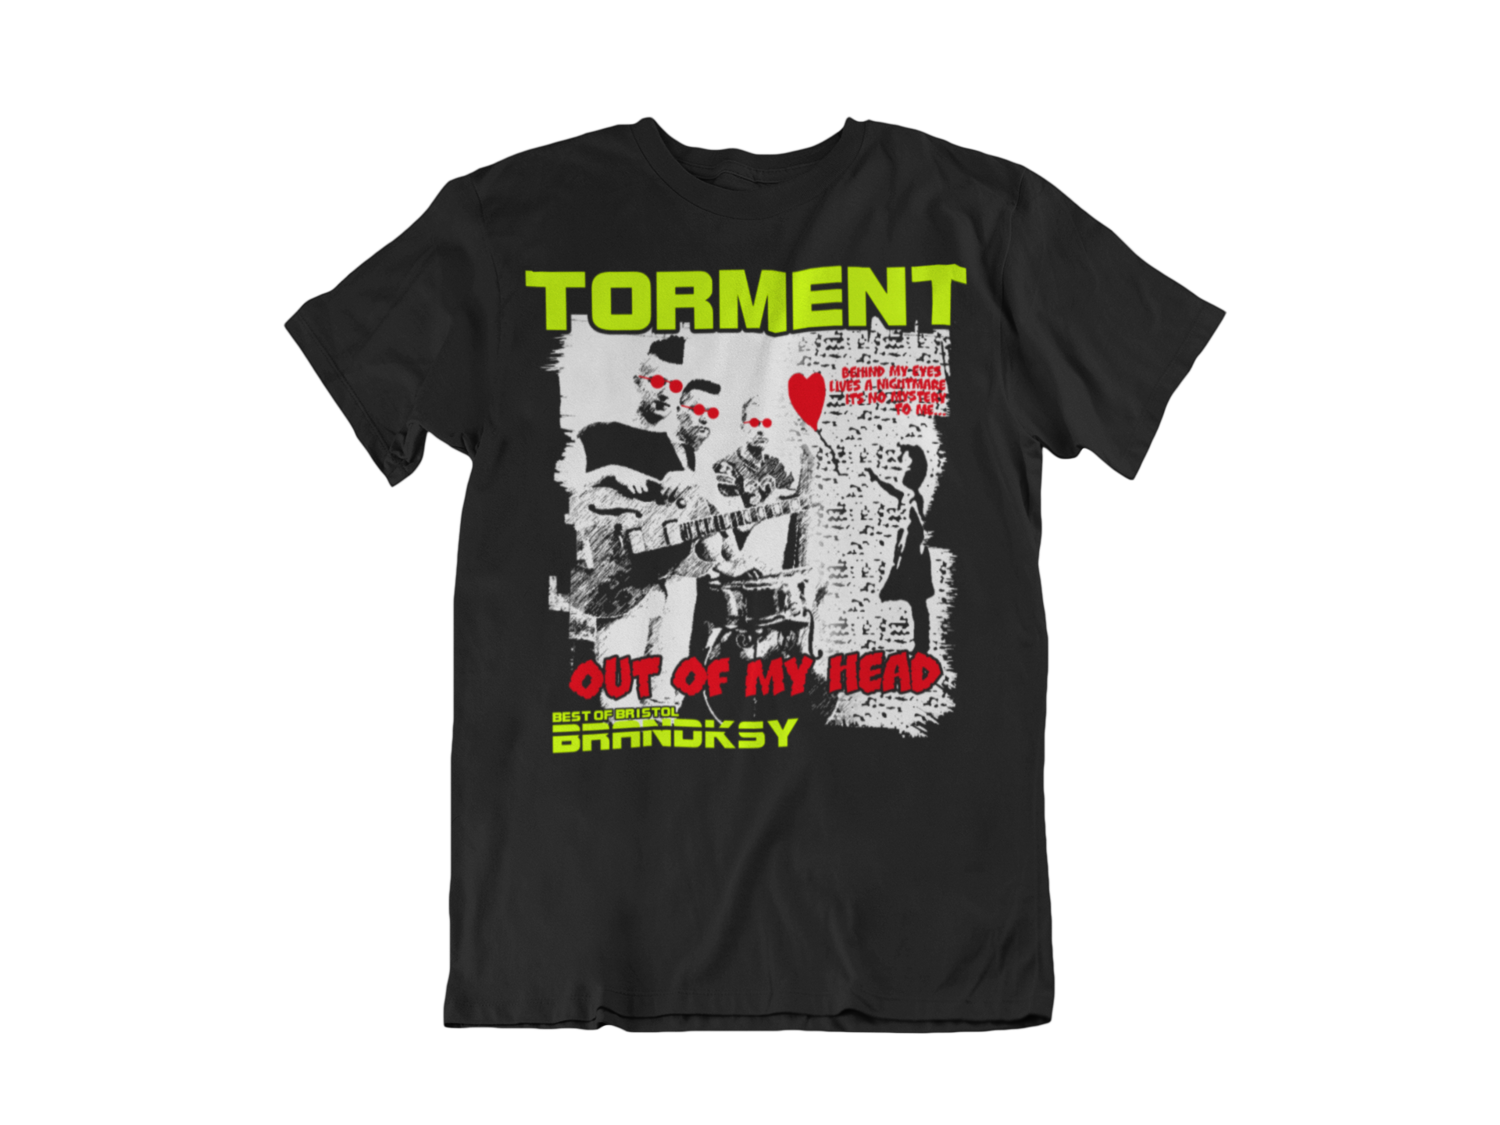 TORMENT "Out of my head" tshirt for MEN